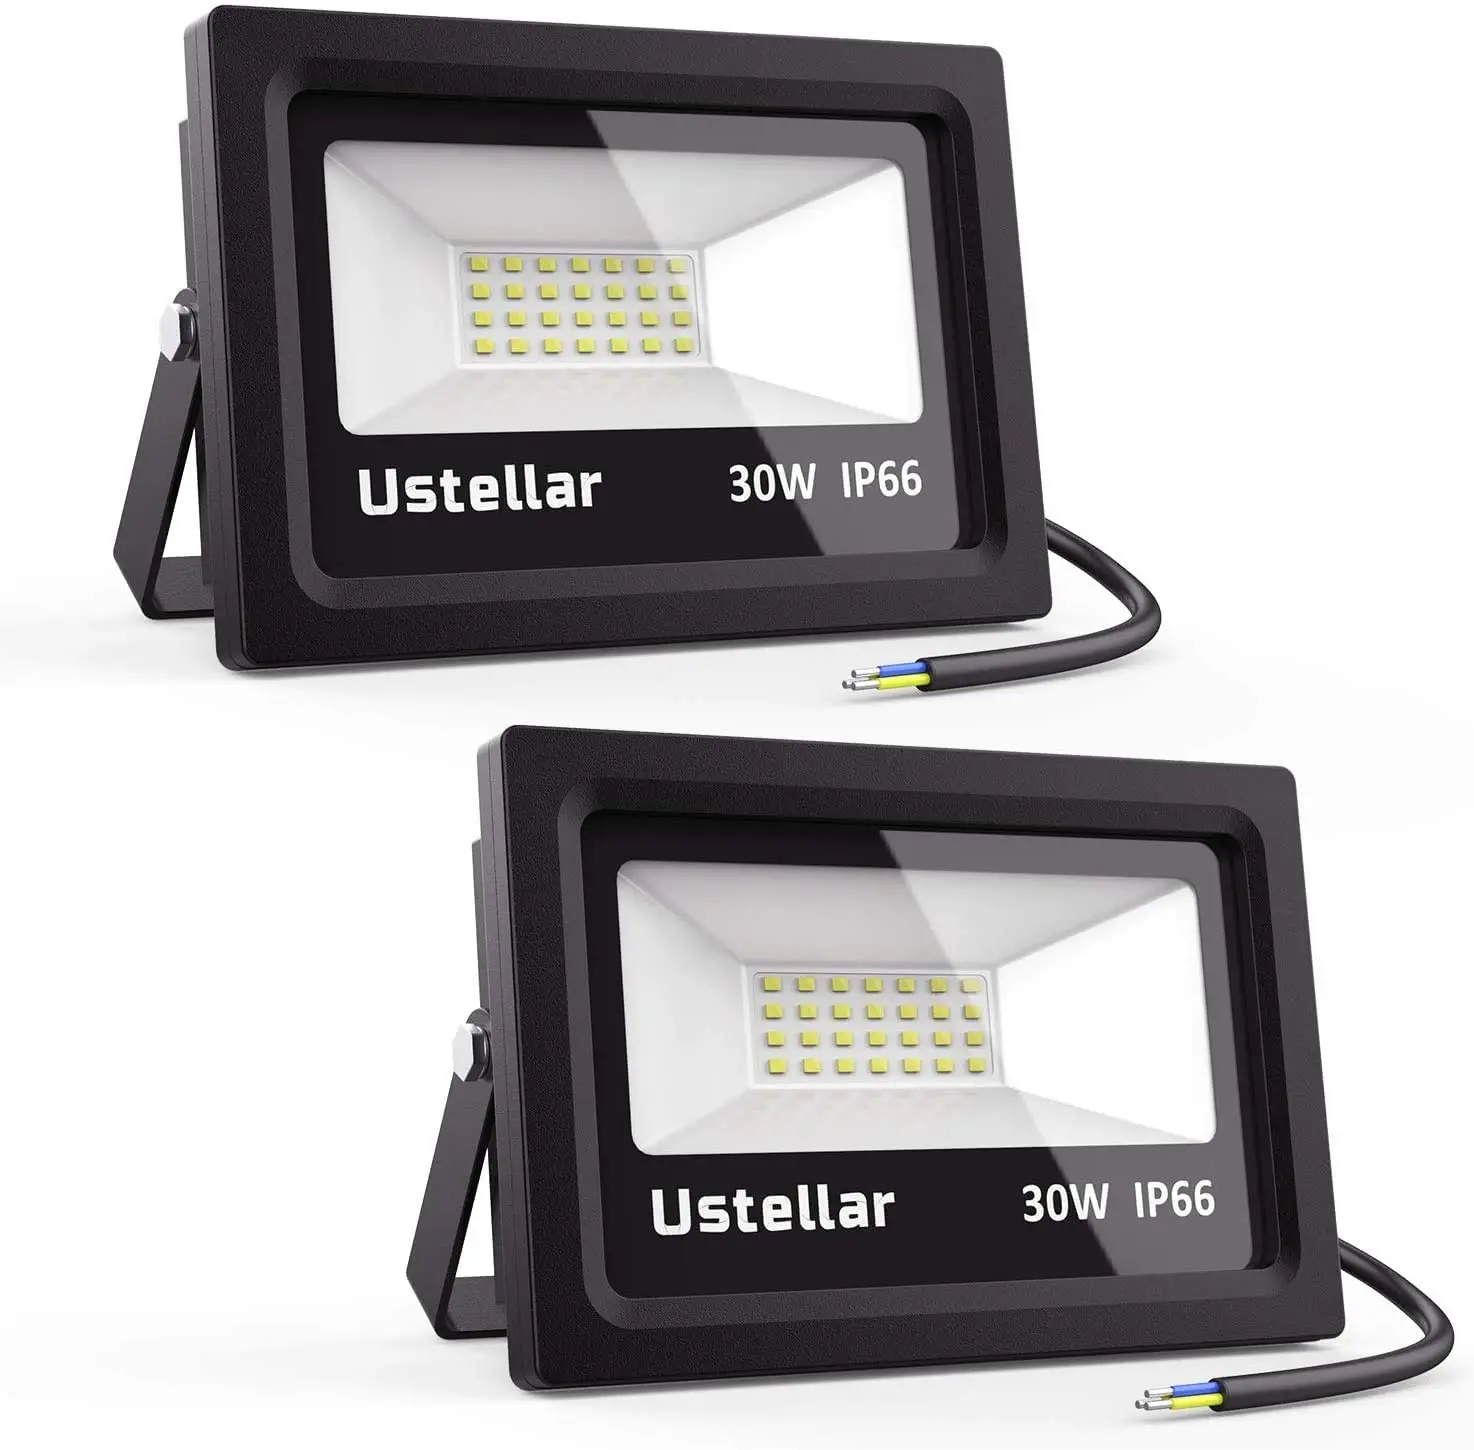 2Pack 30W LED Flood Light, IP66 Waterproof, 2100lm, 150W Halogen Bulb Equivalent Outdoor Super Bright Security Lights